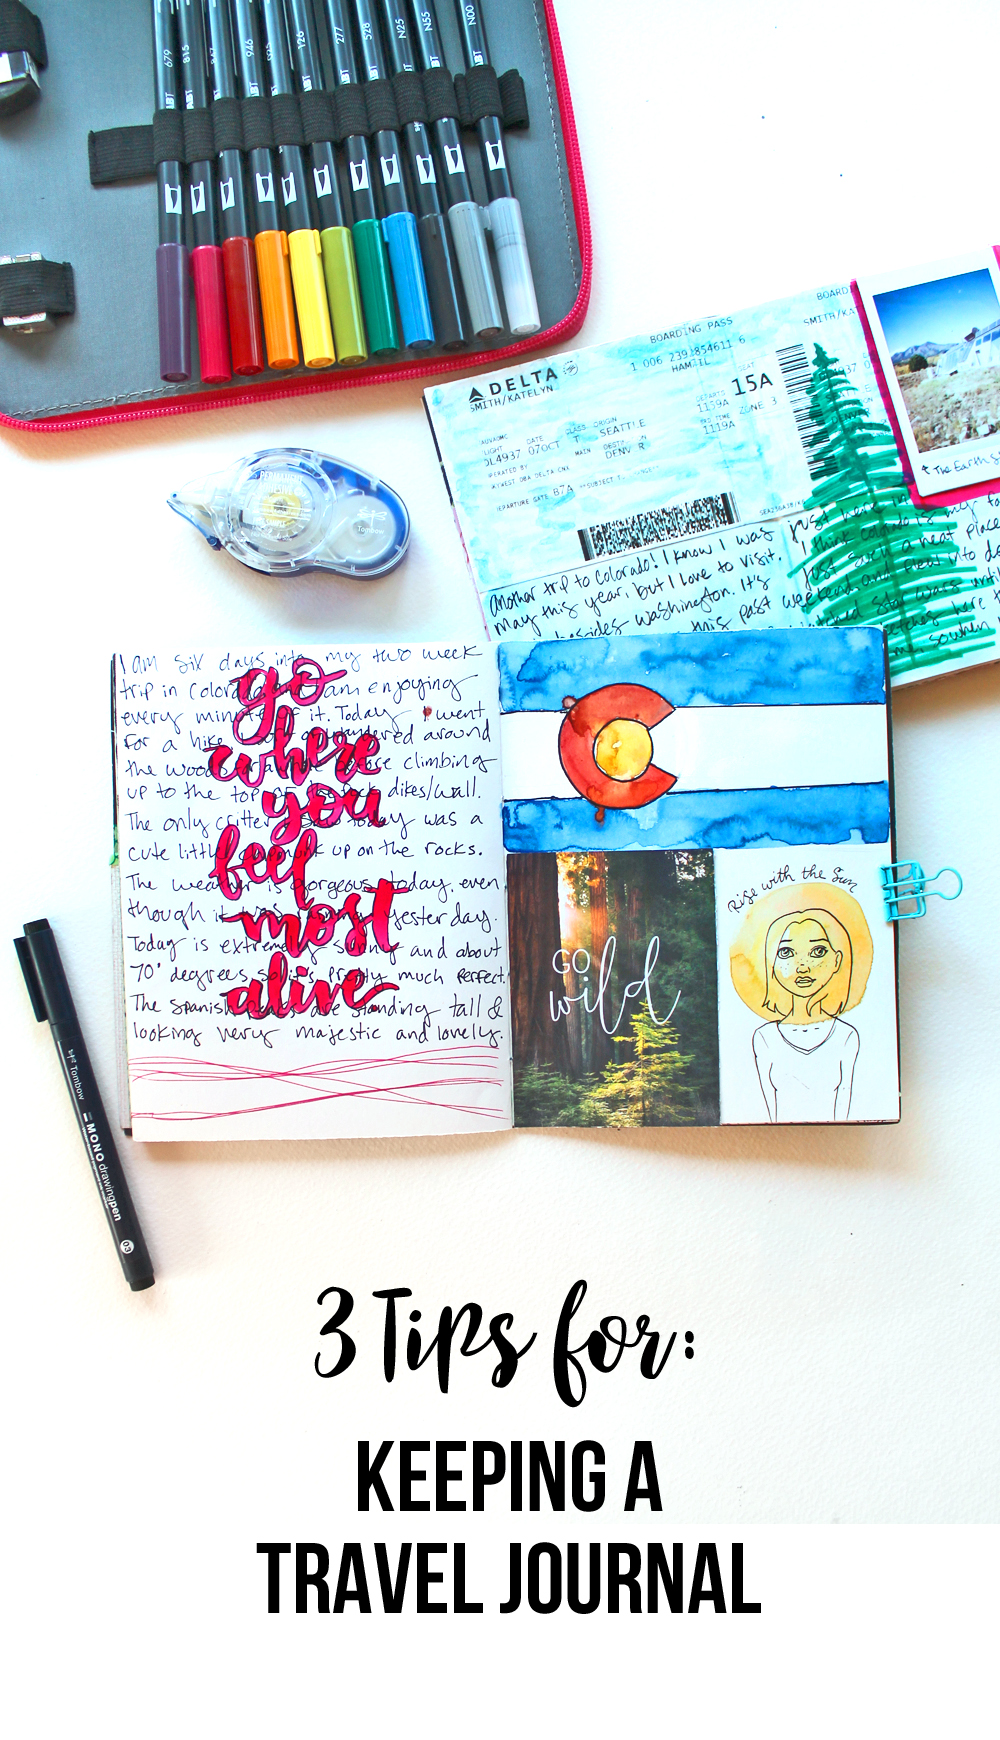 a travel journal meaning